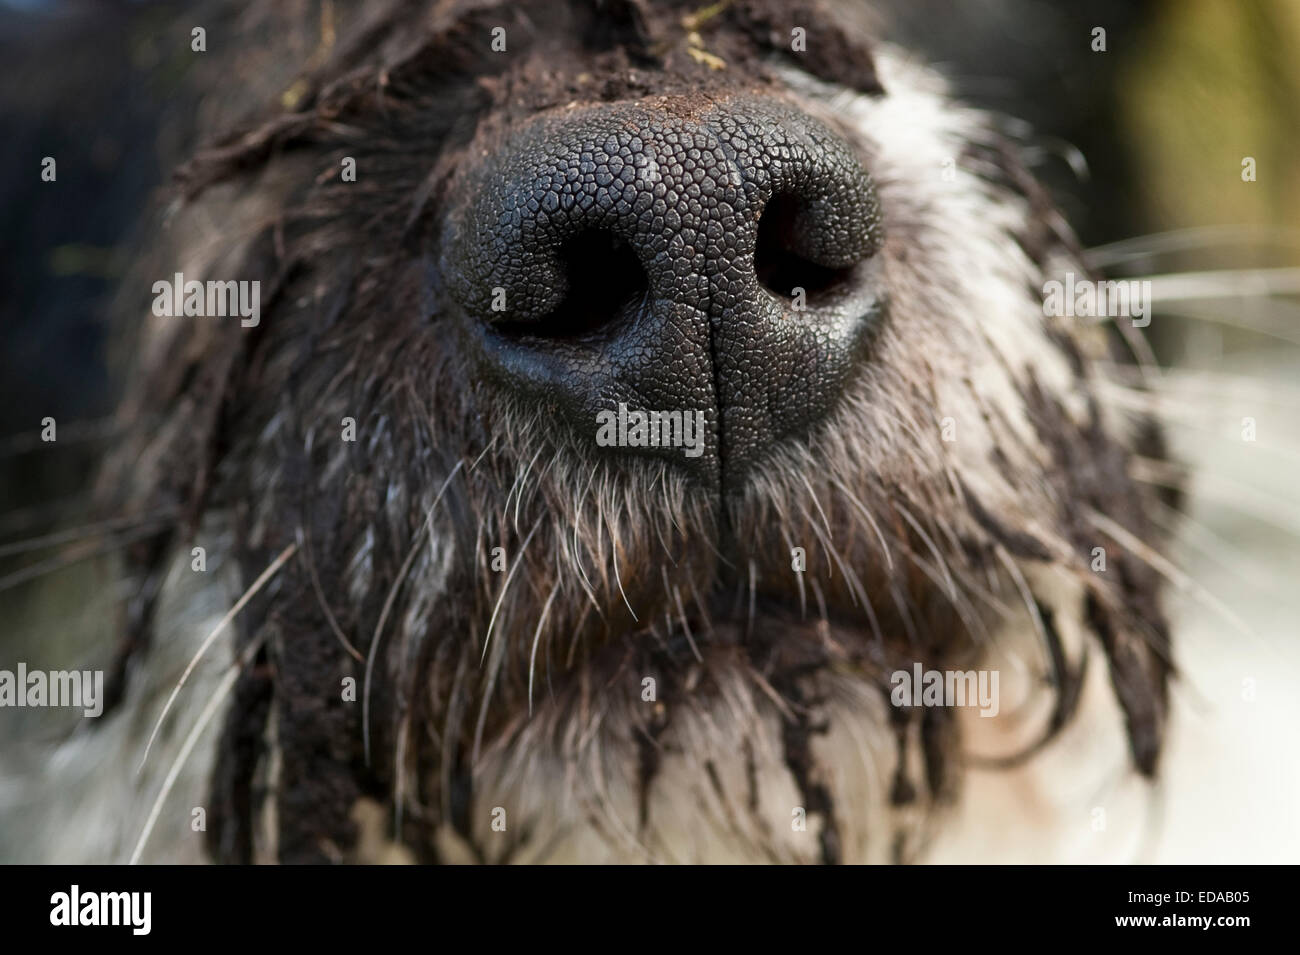 Dog with muddy snout Jack Russell Mix Stock Photo